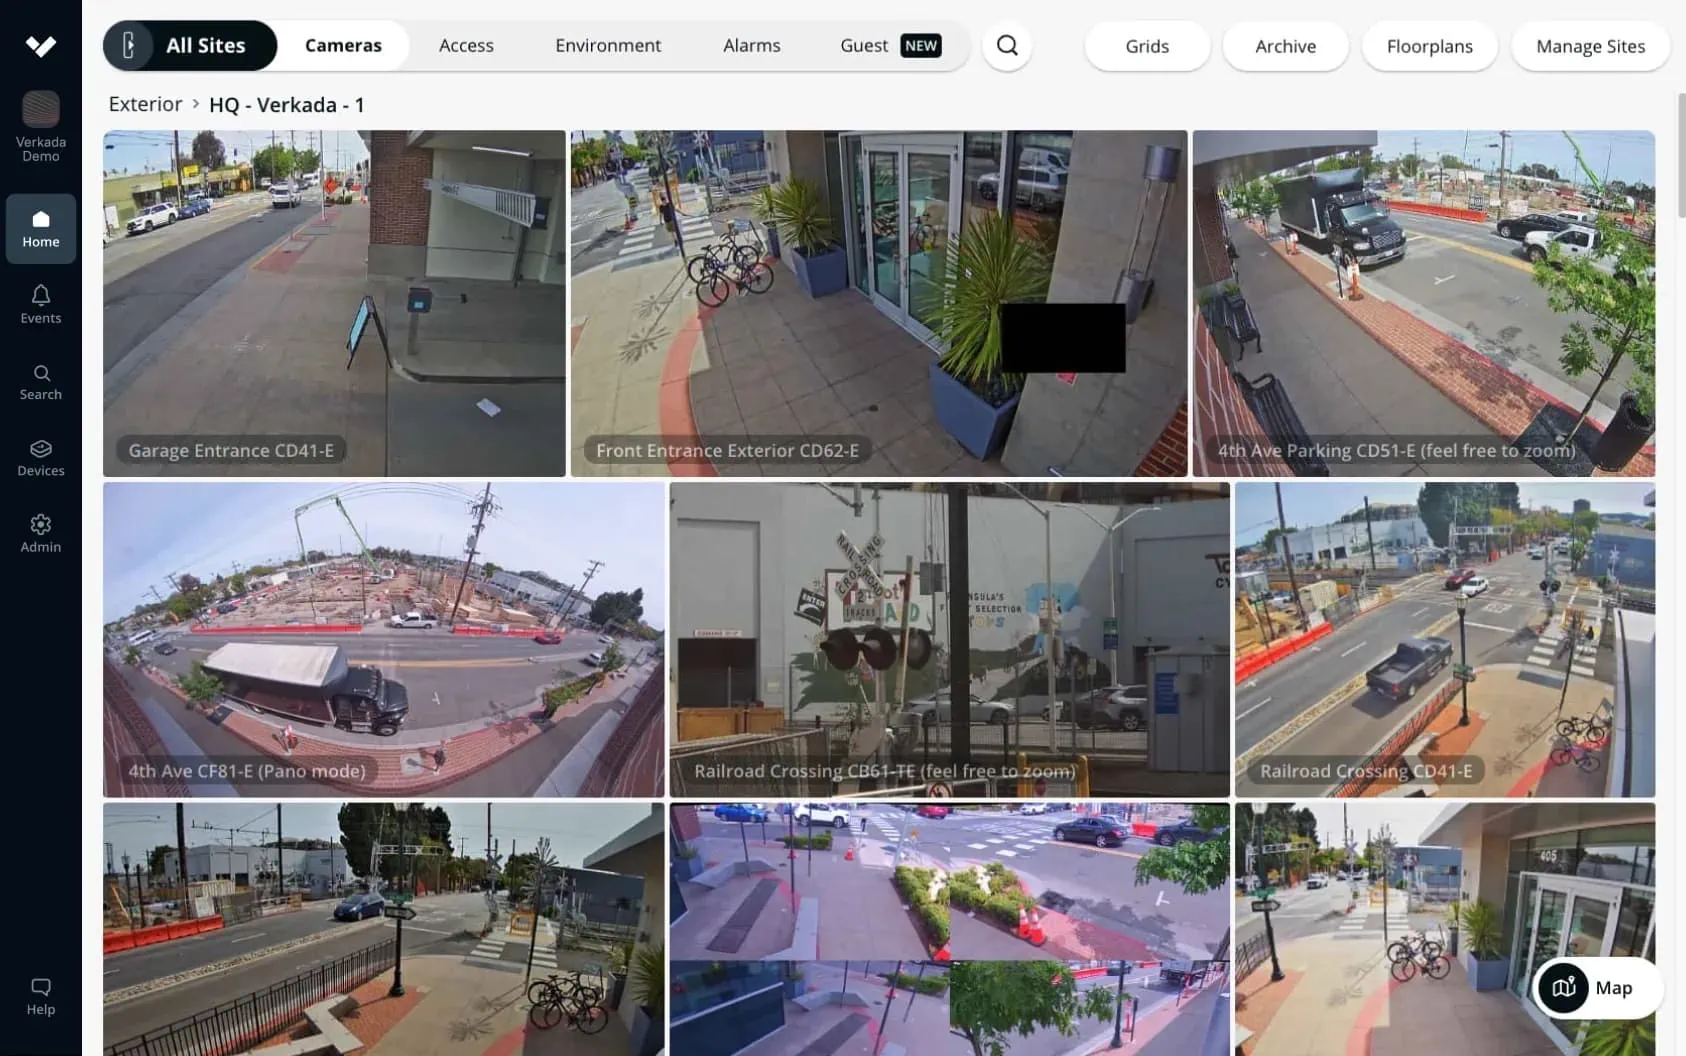 Command platform displaying footage captured by security cameras of a Milwaukee business